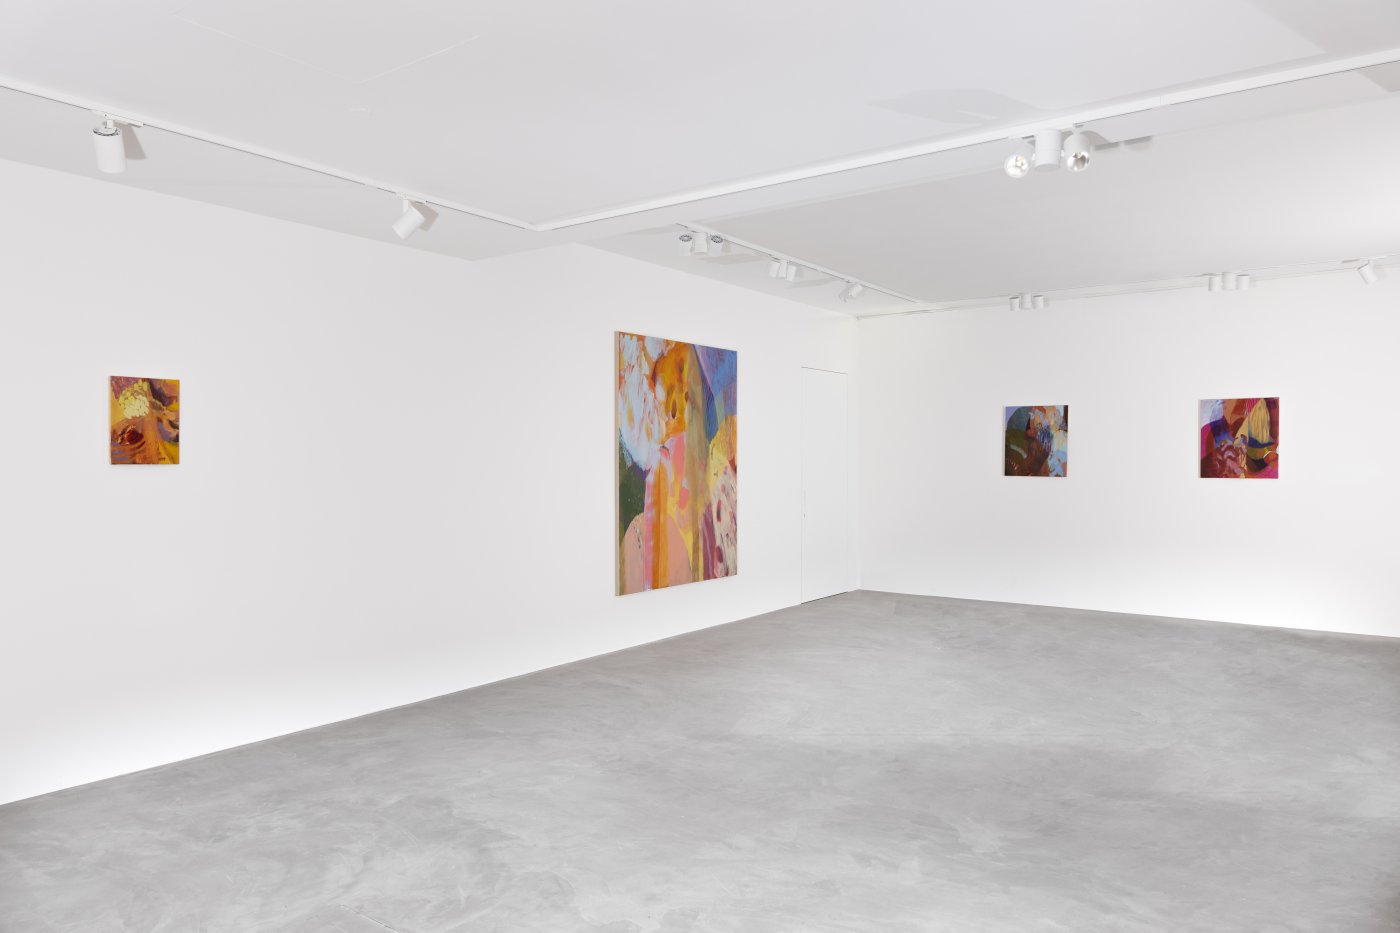 Installation image for Rhiannon Inman-Simpson: A Slow Pulse, at PULPO GALLERY